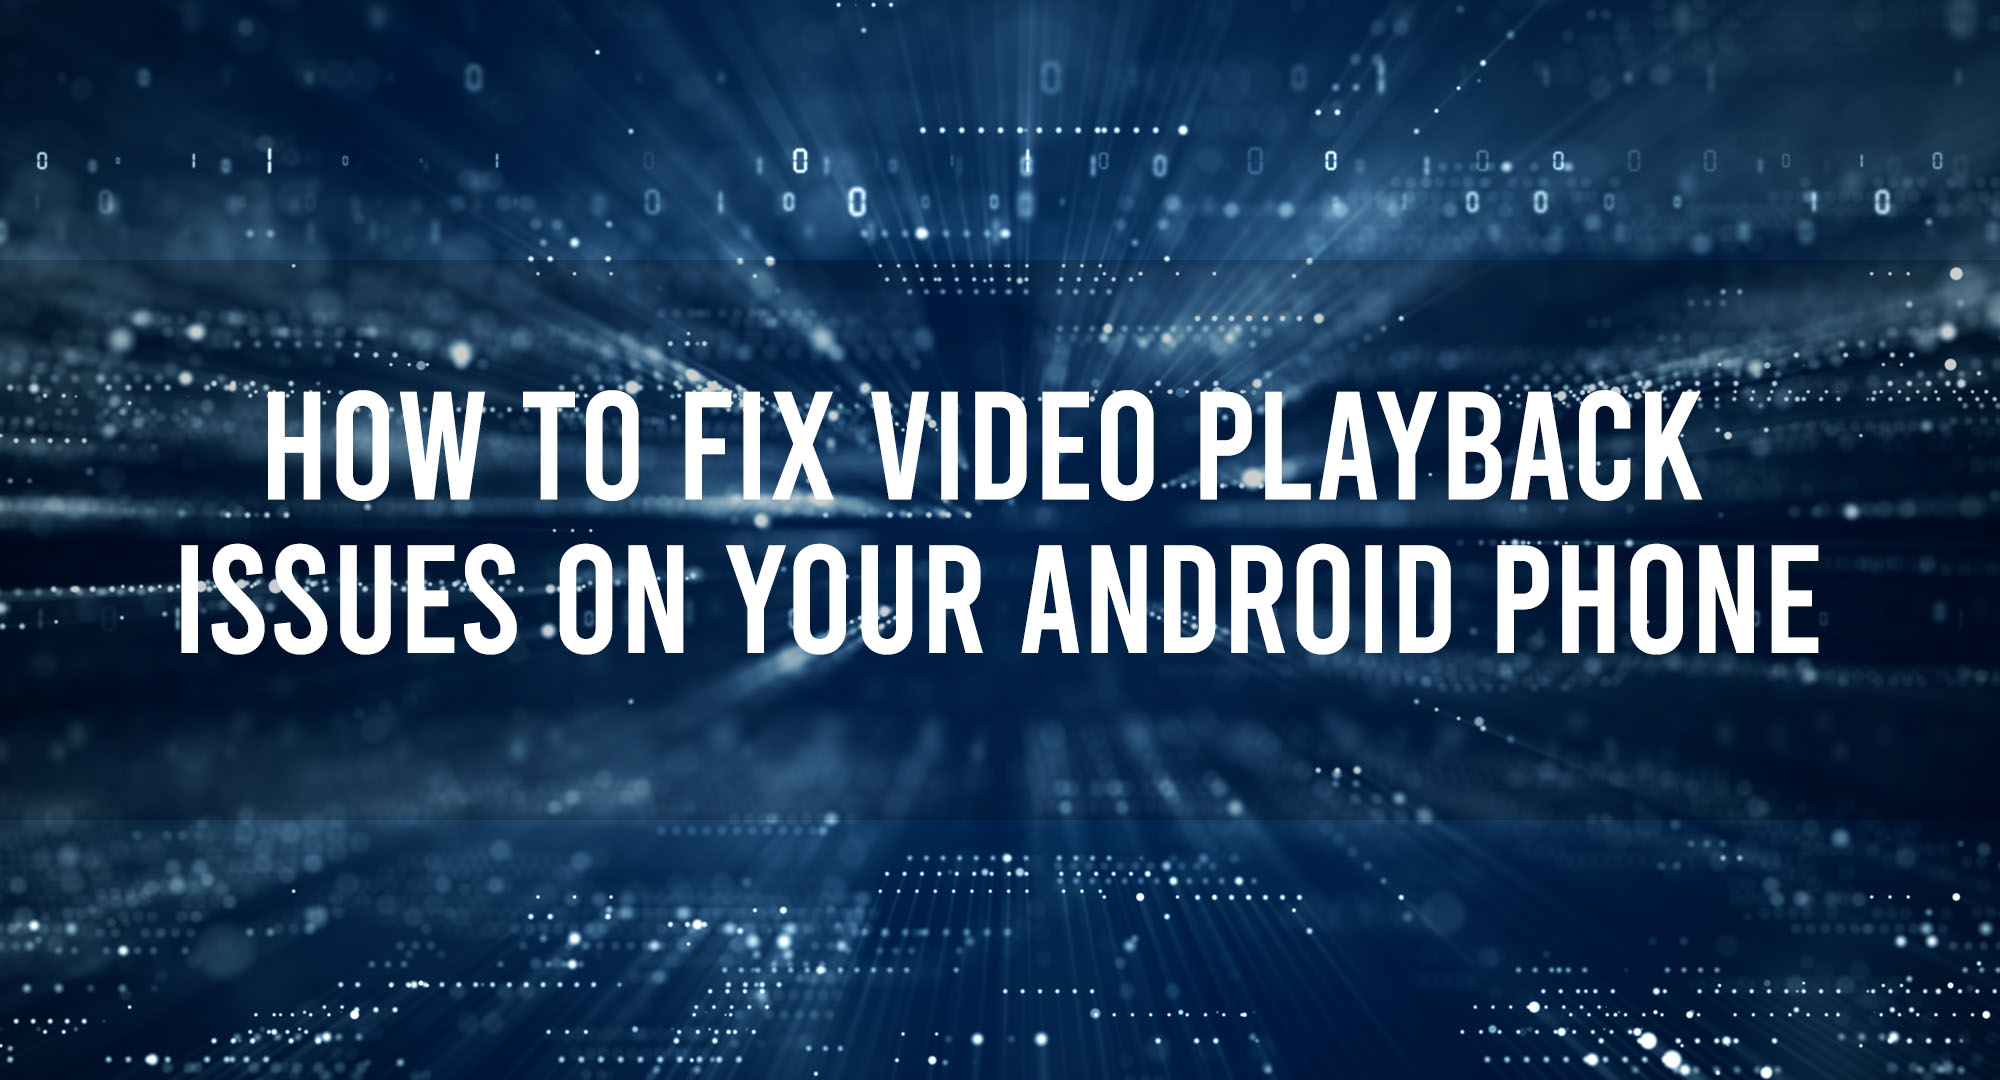 Find the app that is experiencing video playback issues and tap on it.
Tap on Storage or Storage & Cache.